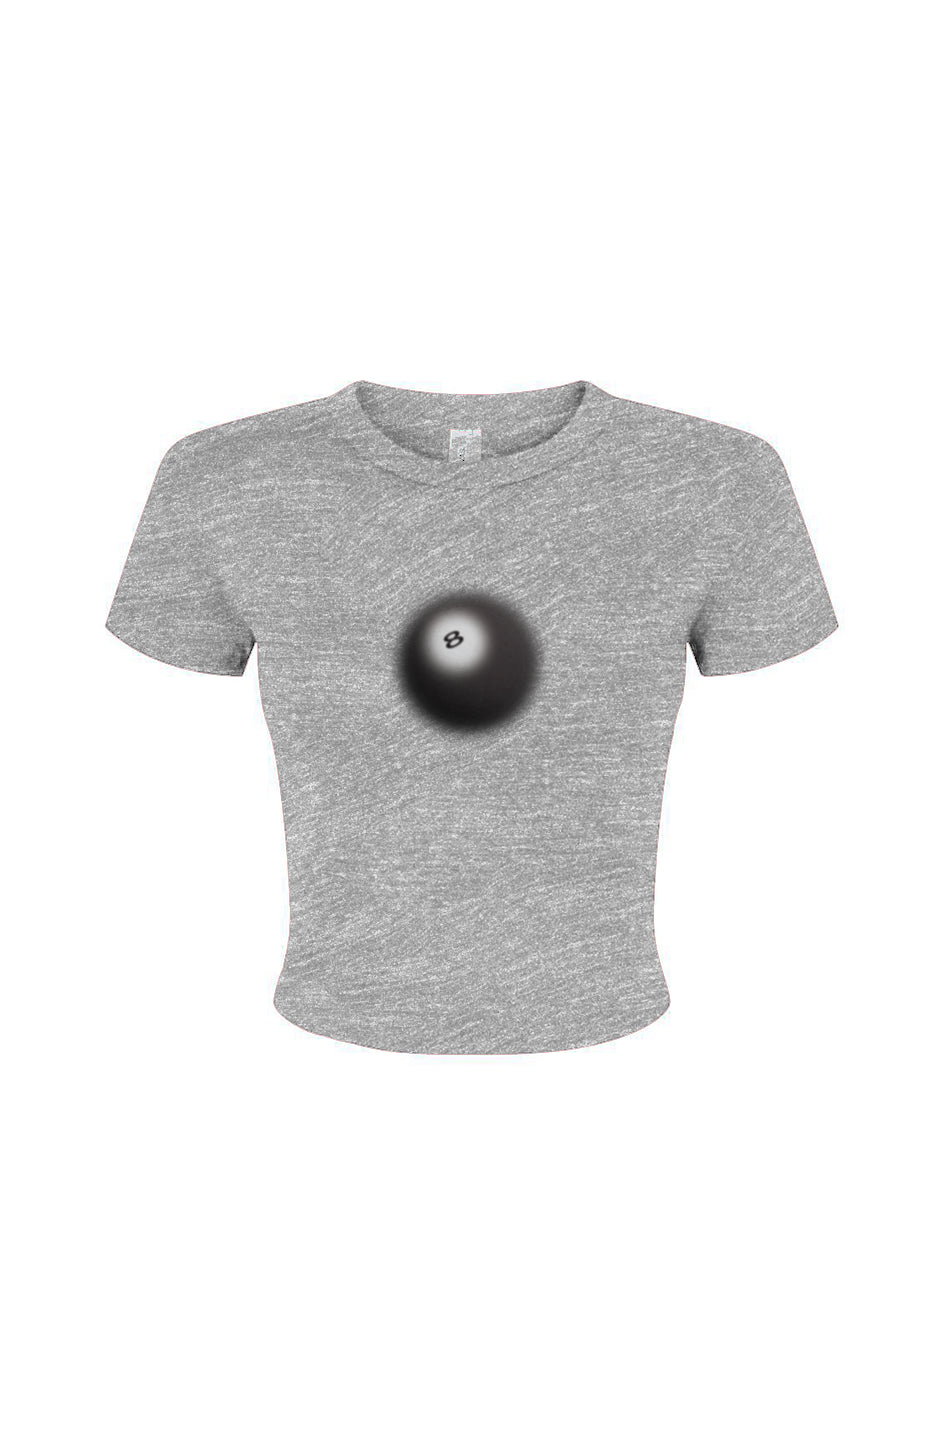 Drunk 8-Ball Fitted Baby Tee